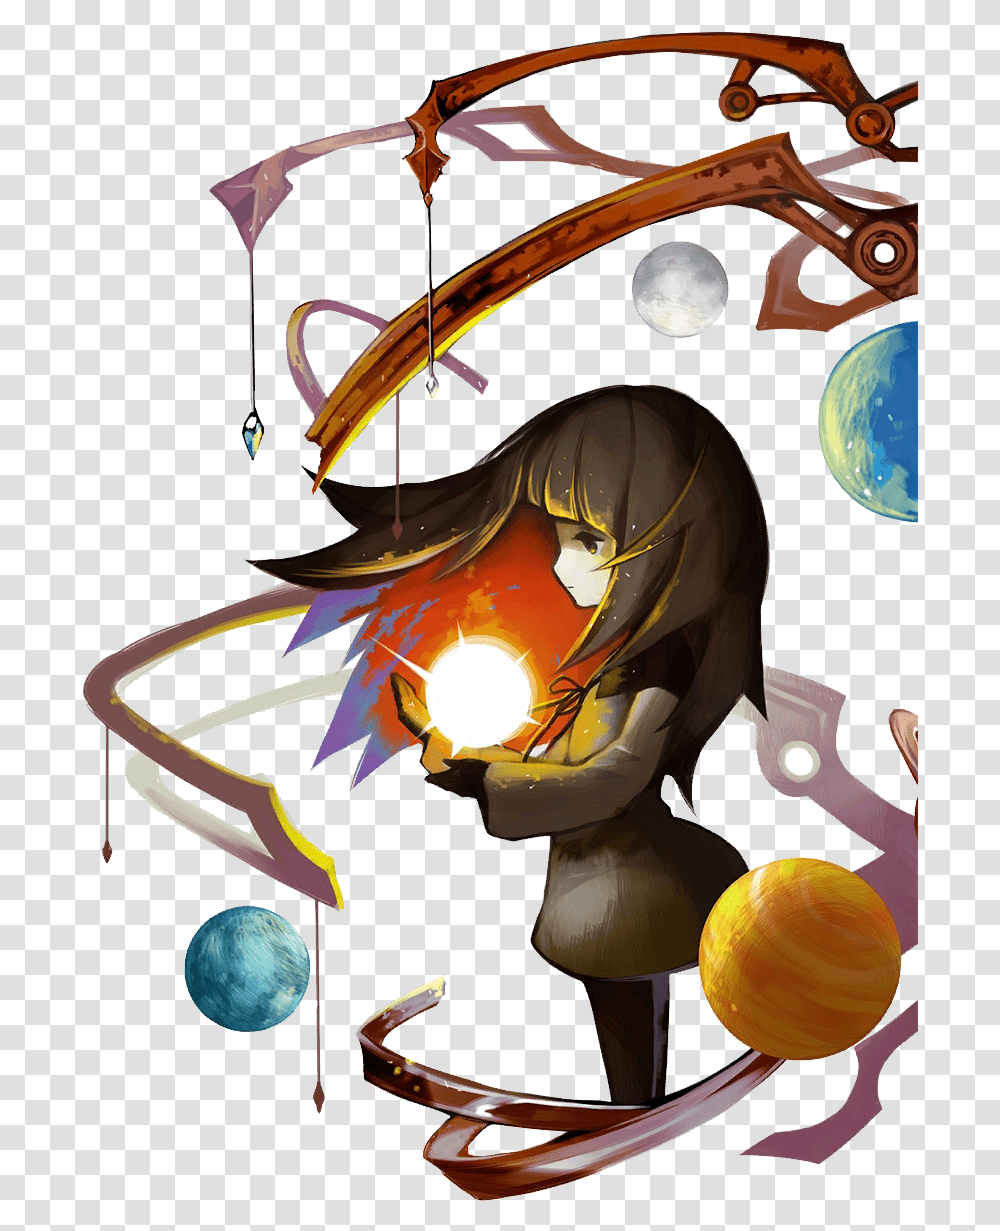 Sunset And I Race The Dawn Download Deemo Sunset, Helmet, Sweets Transparent Png